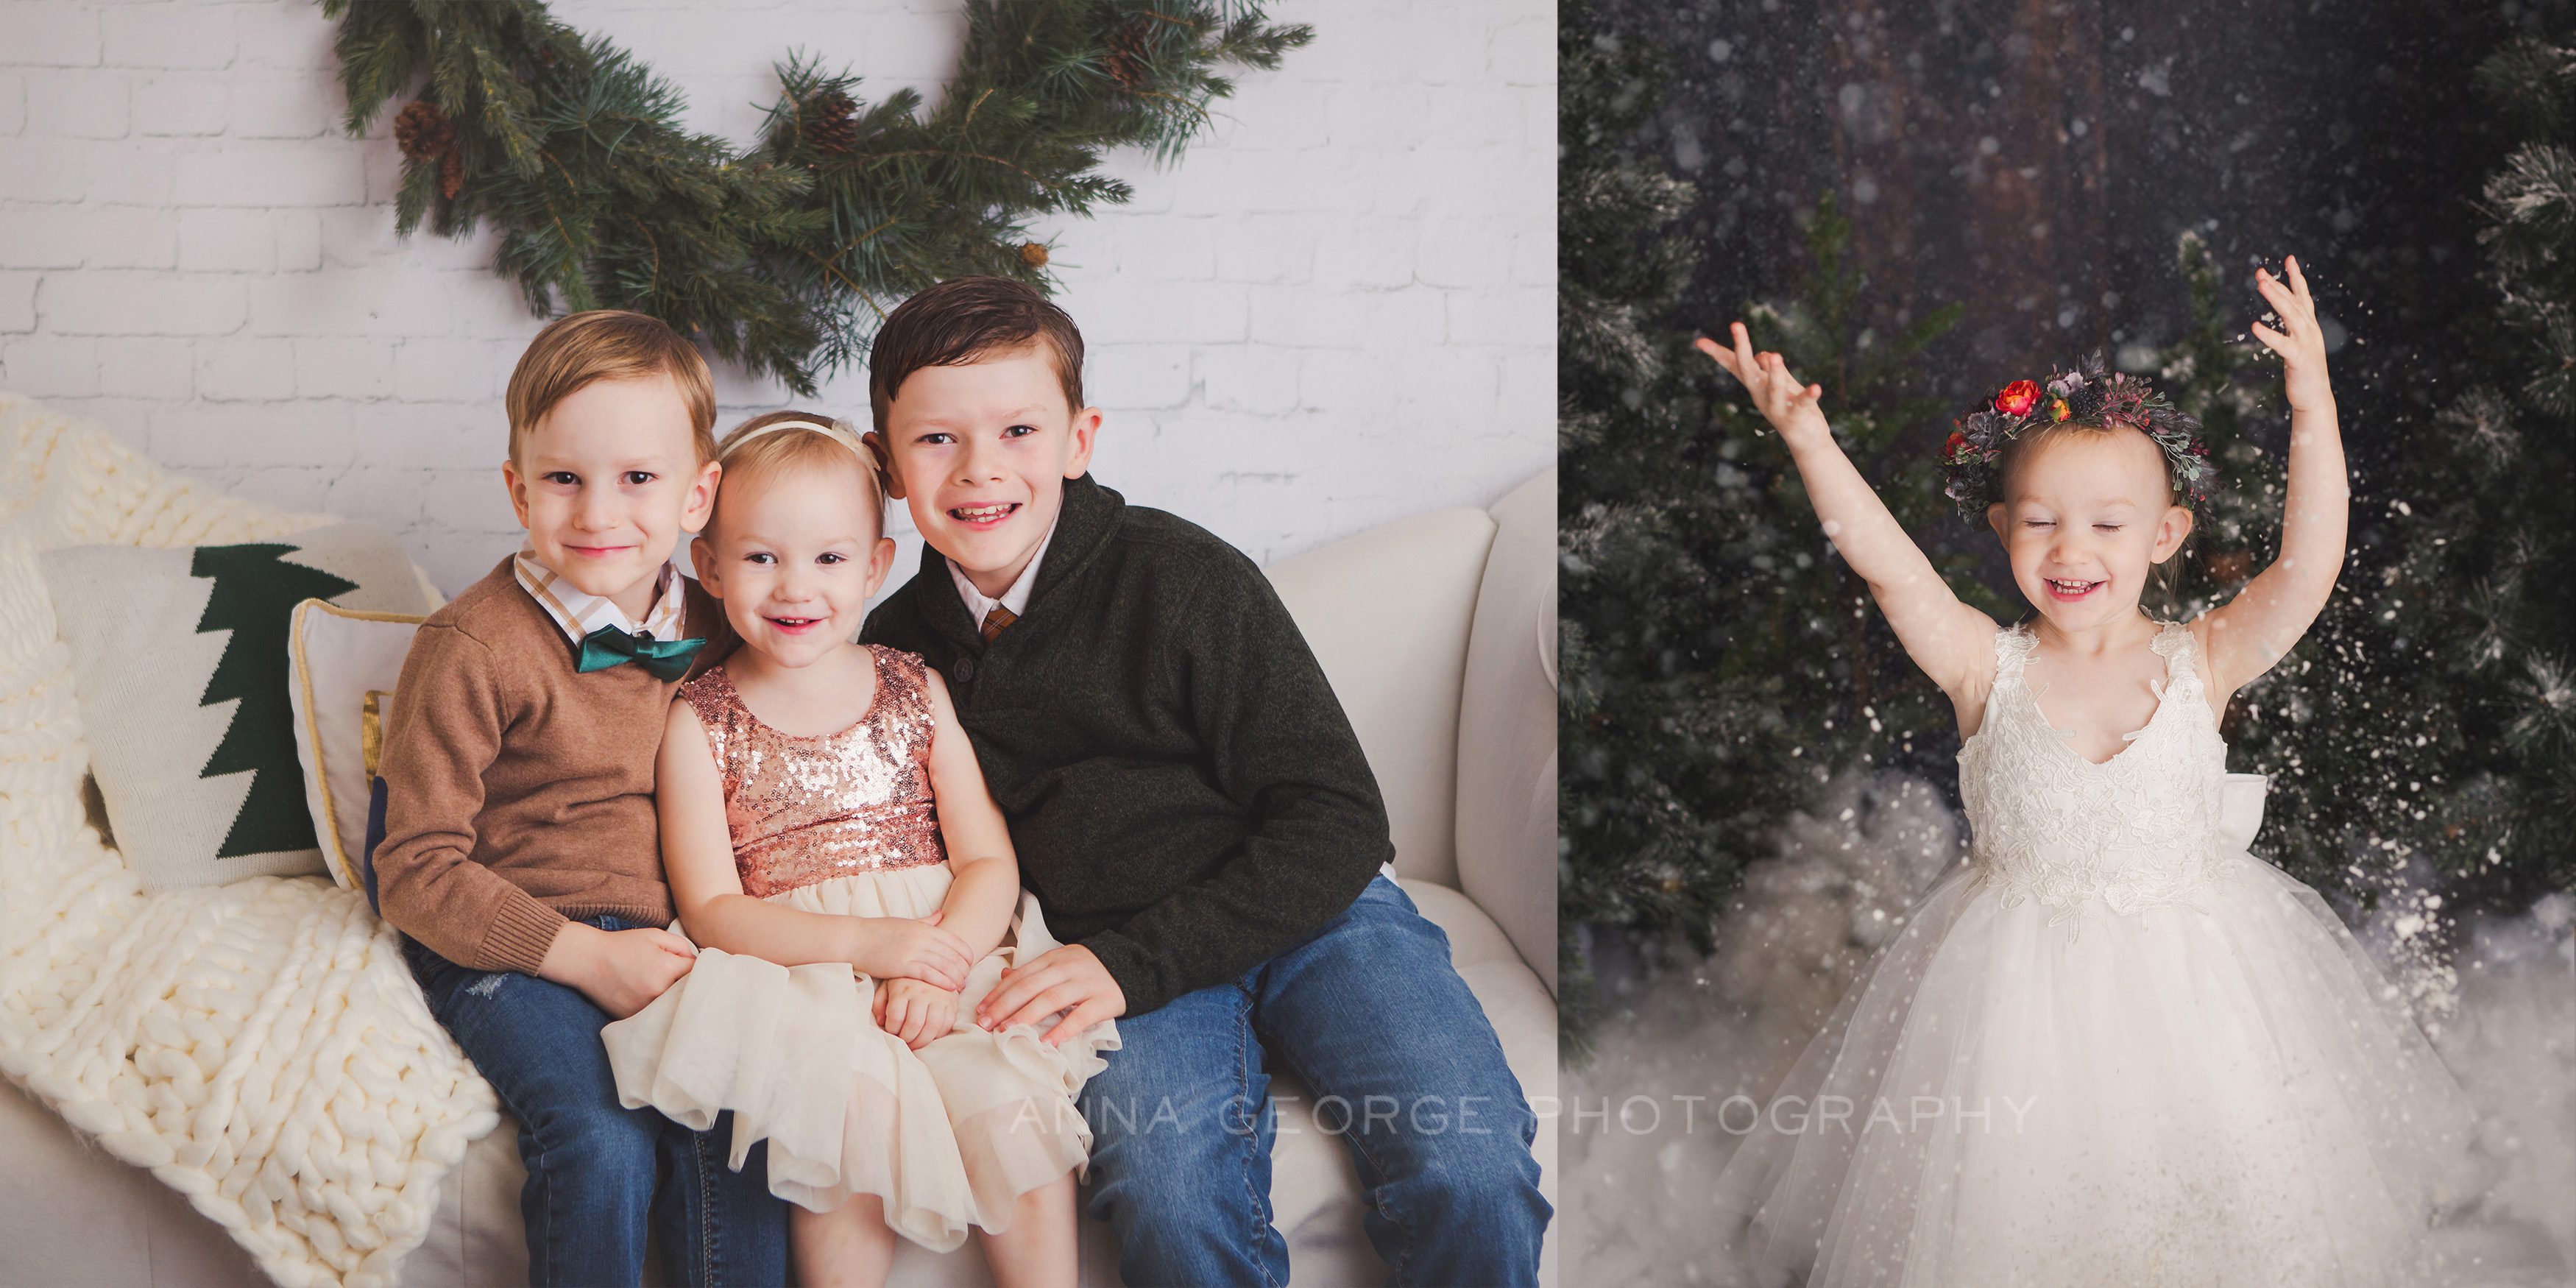 www.annageorgephoto.com | Anna George Photography | Madison WI holiday mini sessions 2018